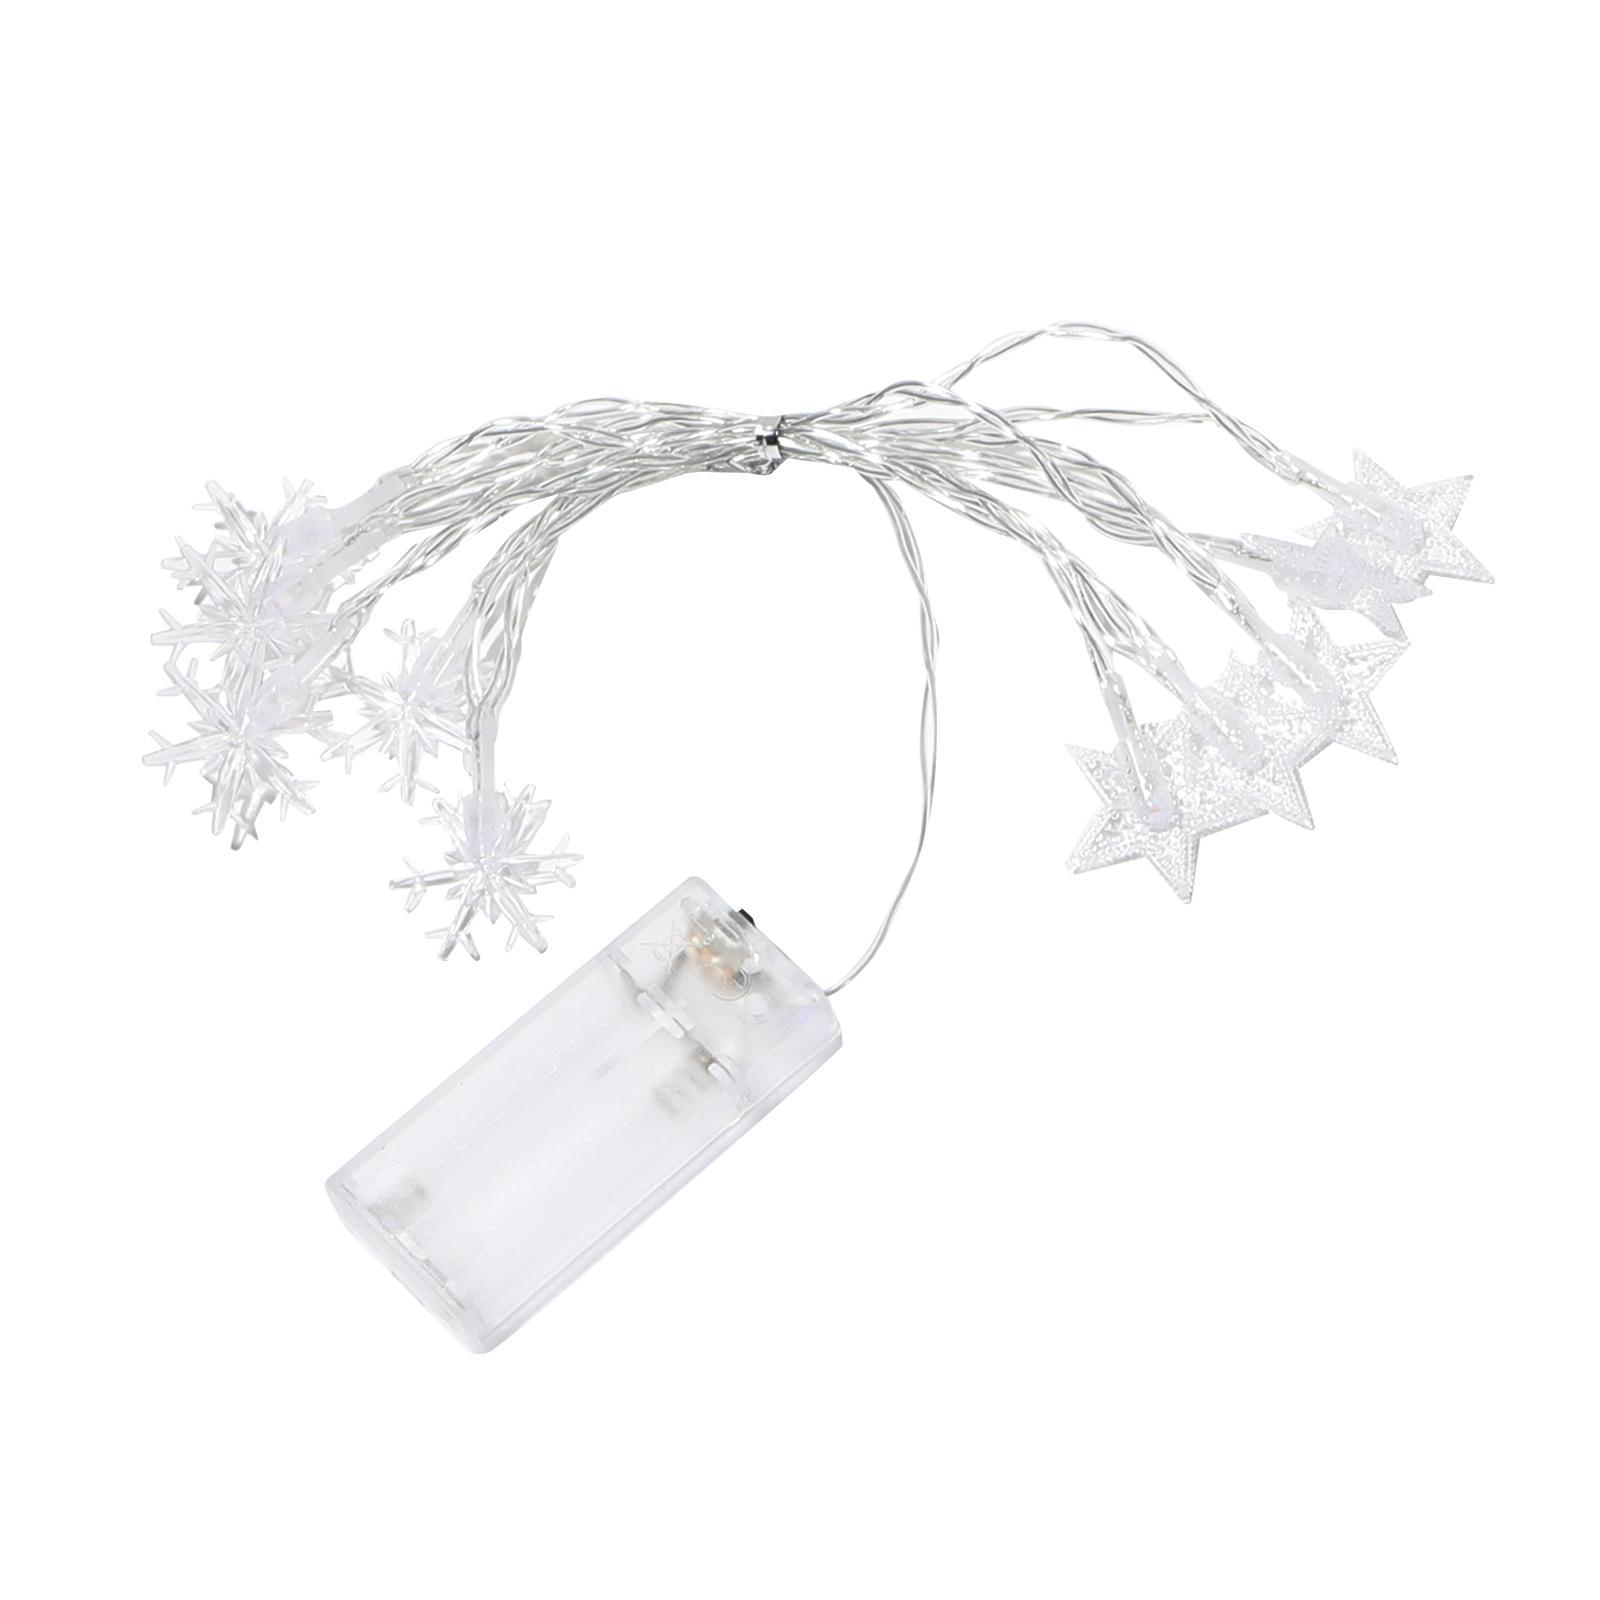 Christmas String Lights Decorative Clear for Holiday Home Decor Xmas Tree